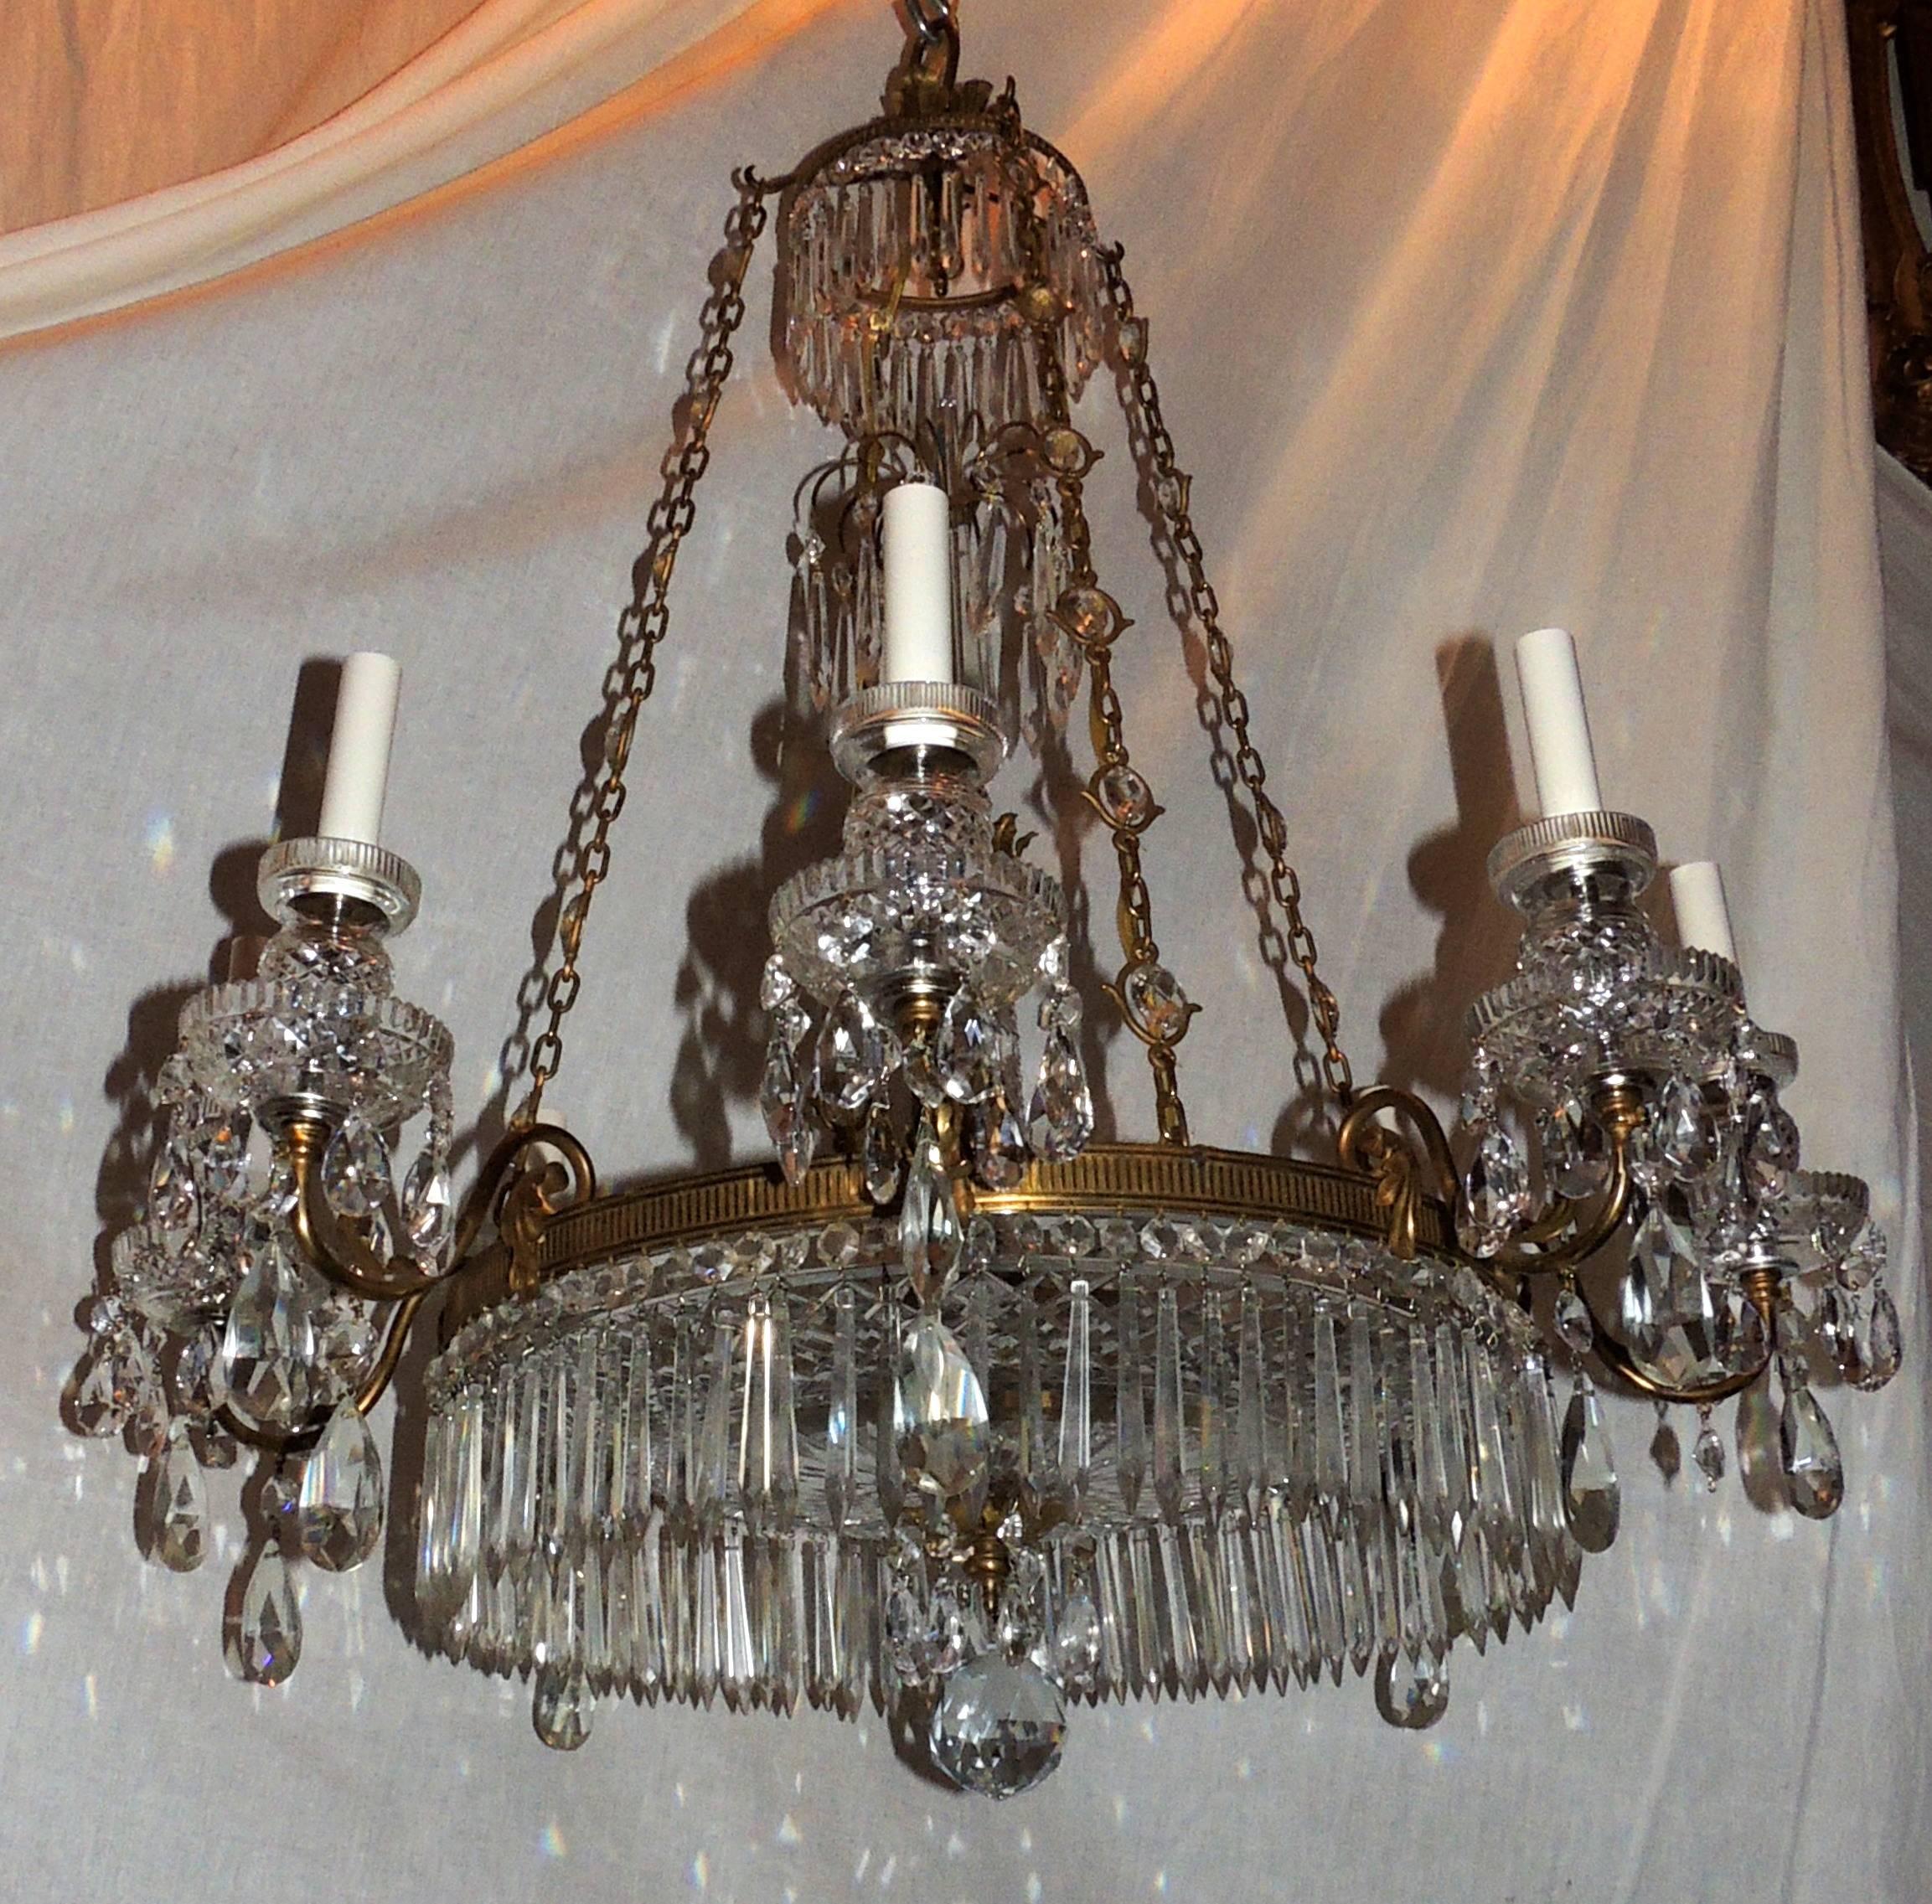 Exceptional Regency Doré Bronze Cut Crystal Centre Bowl Empire Baltic Chandelier In Good Condition For Sale In Roslyn, NY